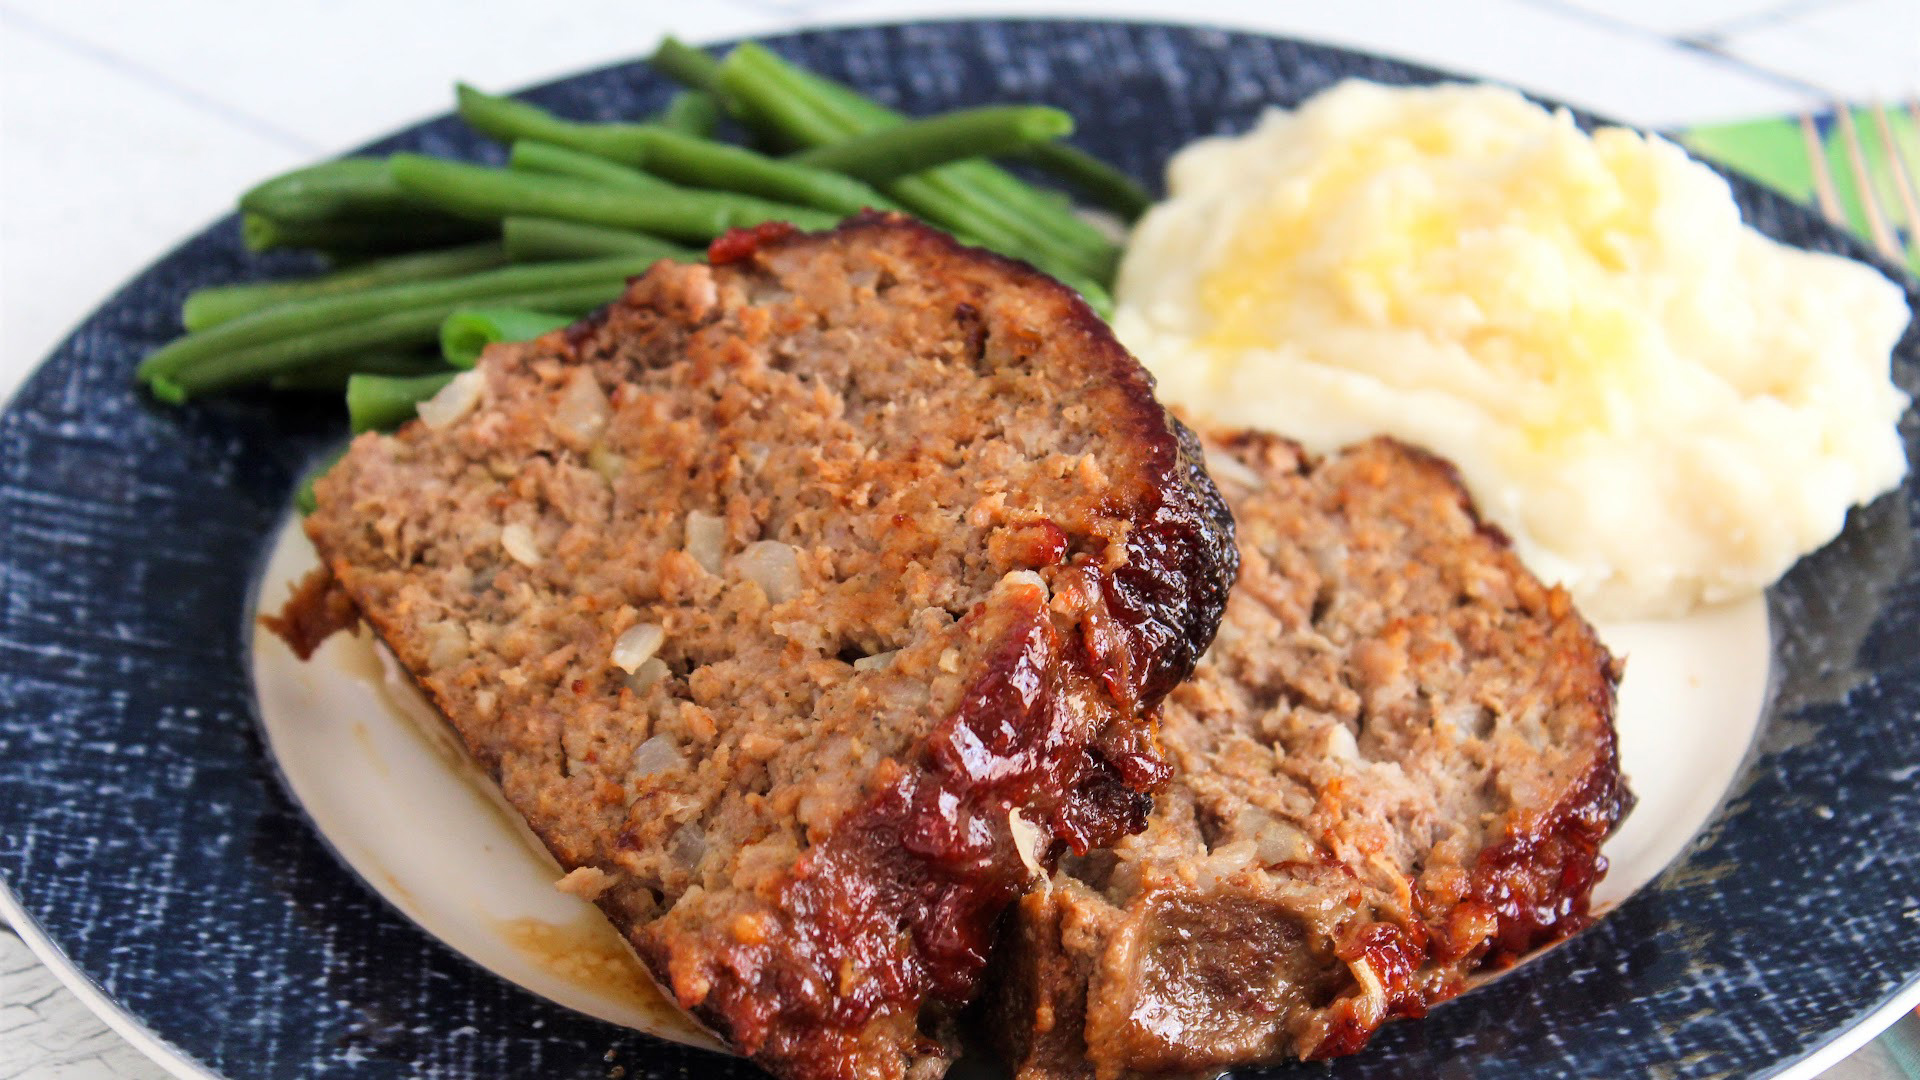 Meatloaf Is An Easy Dinner And This One Is Indeed Hearty - Hearty Meatloaf